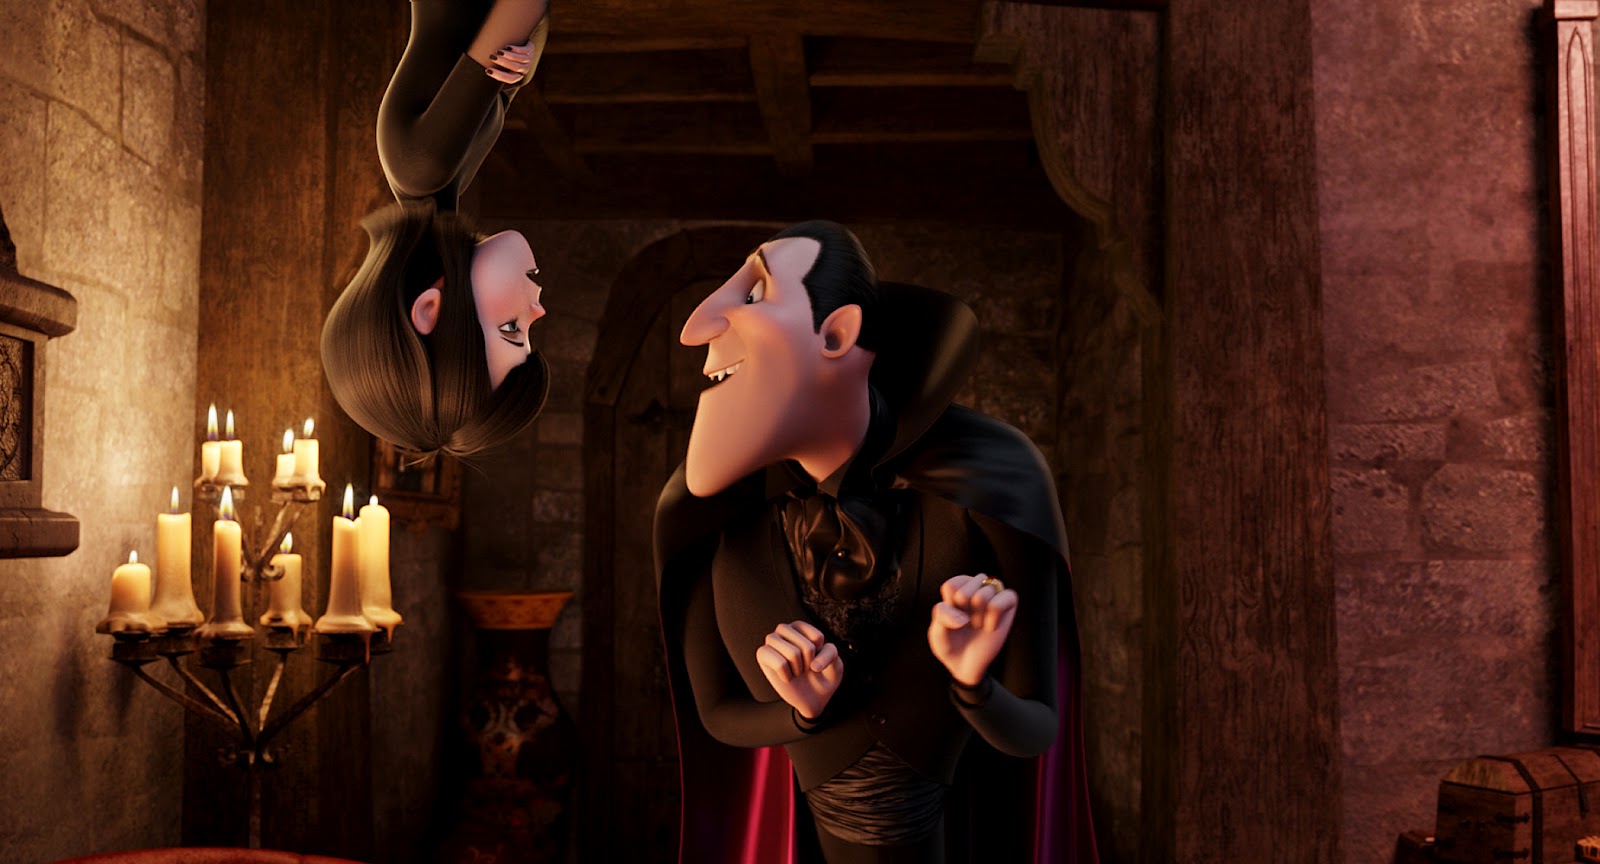 Digitista MediaWave: Monsters Are as Crazy as Humans in HOTEL TRANSYLVANIA